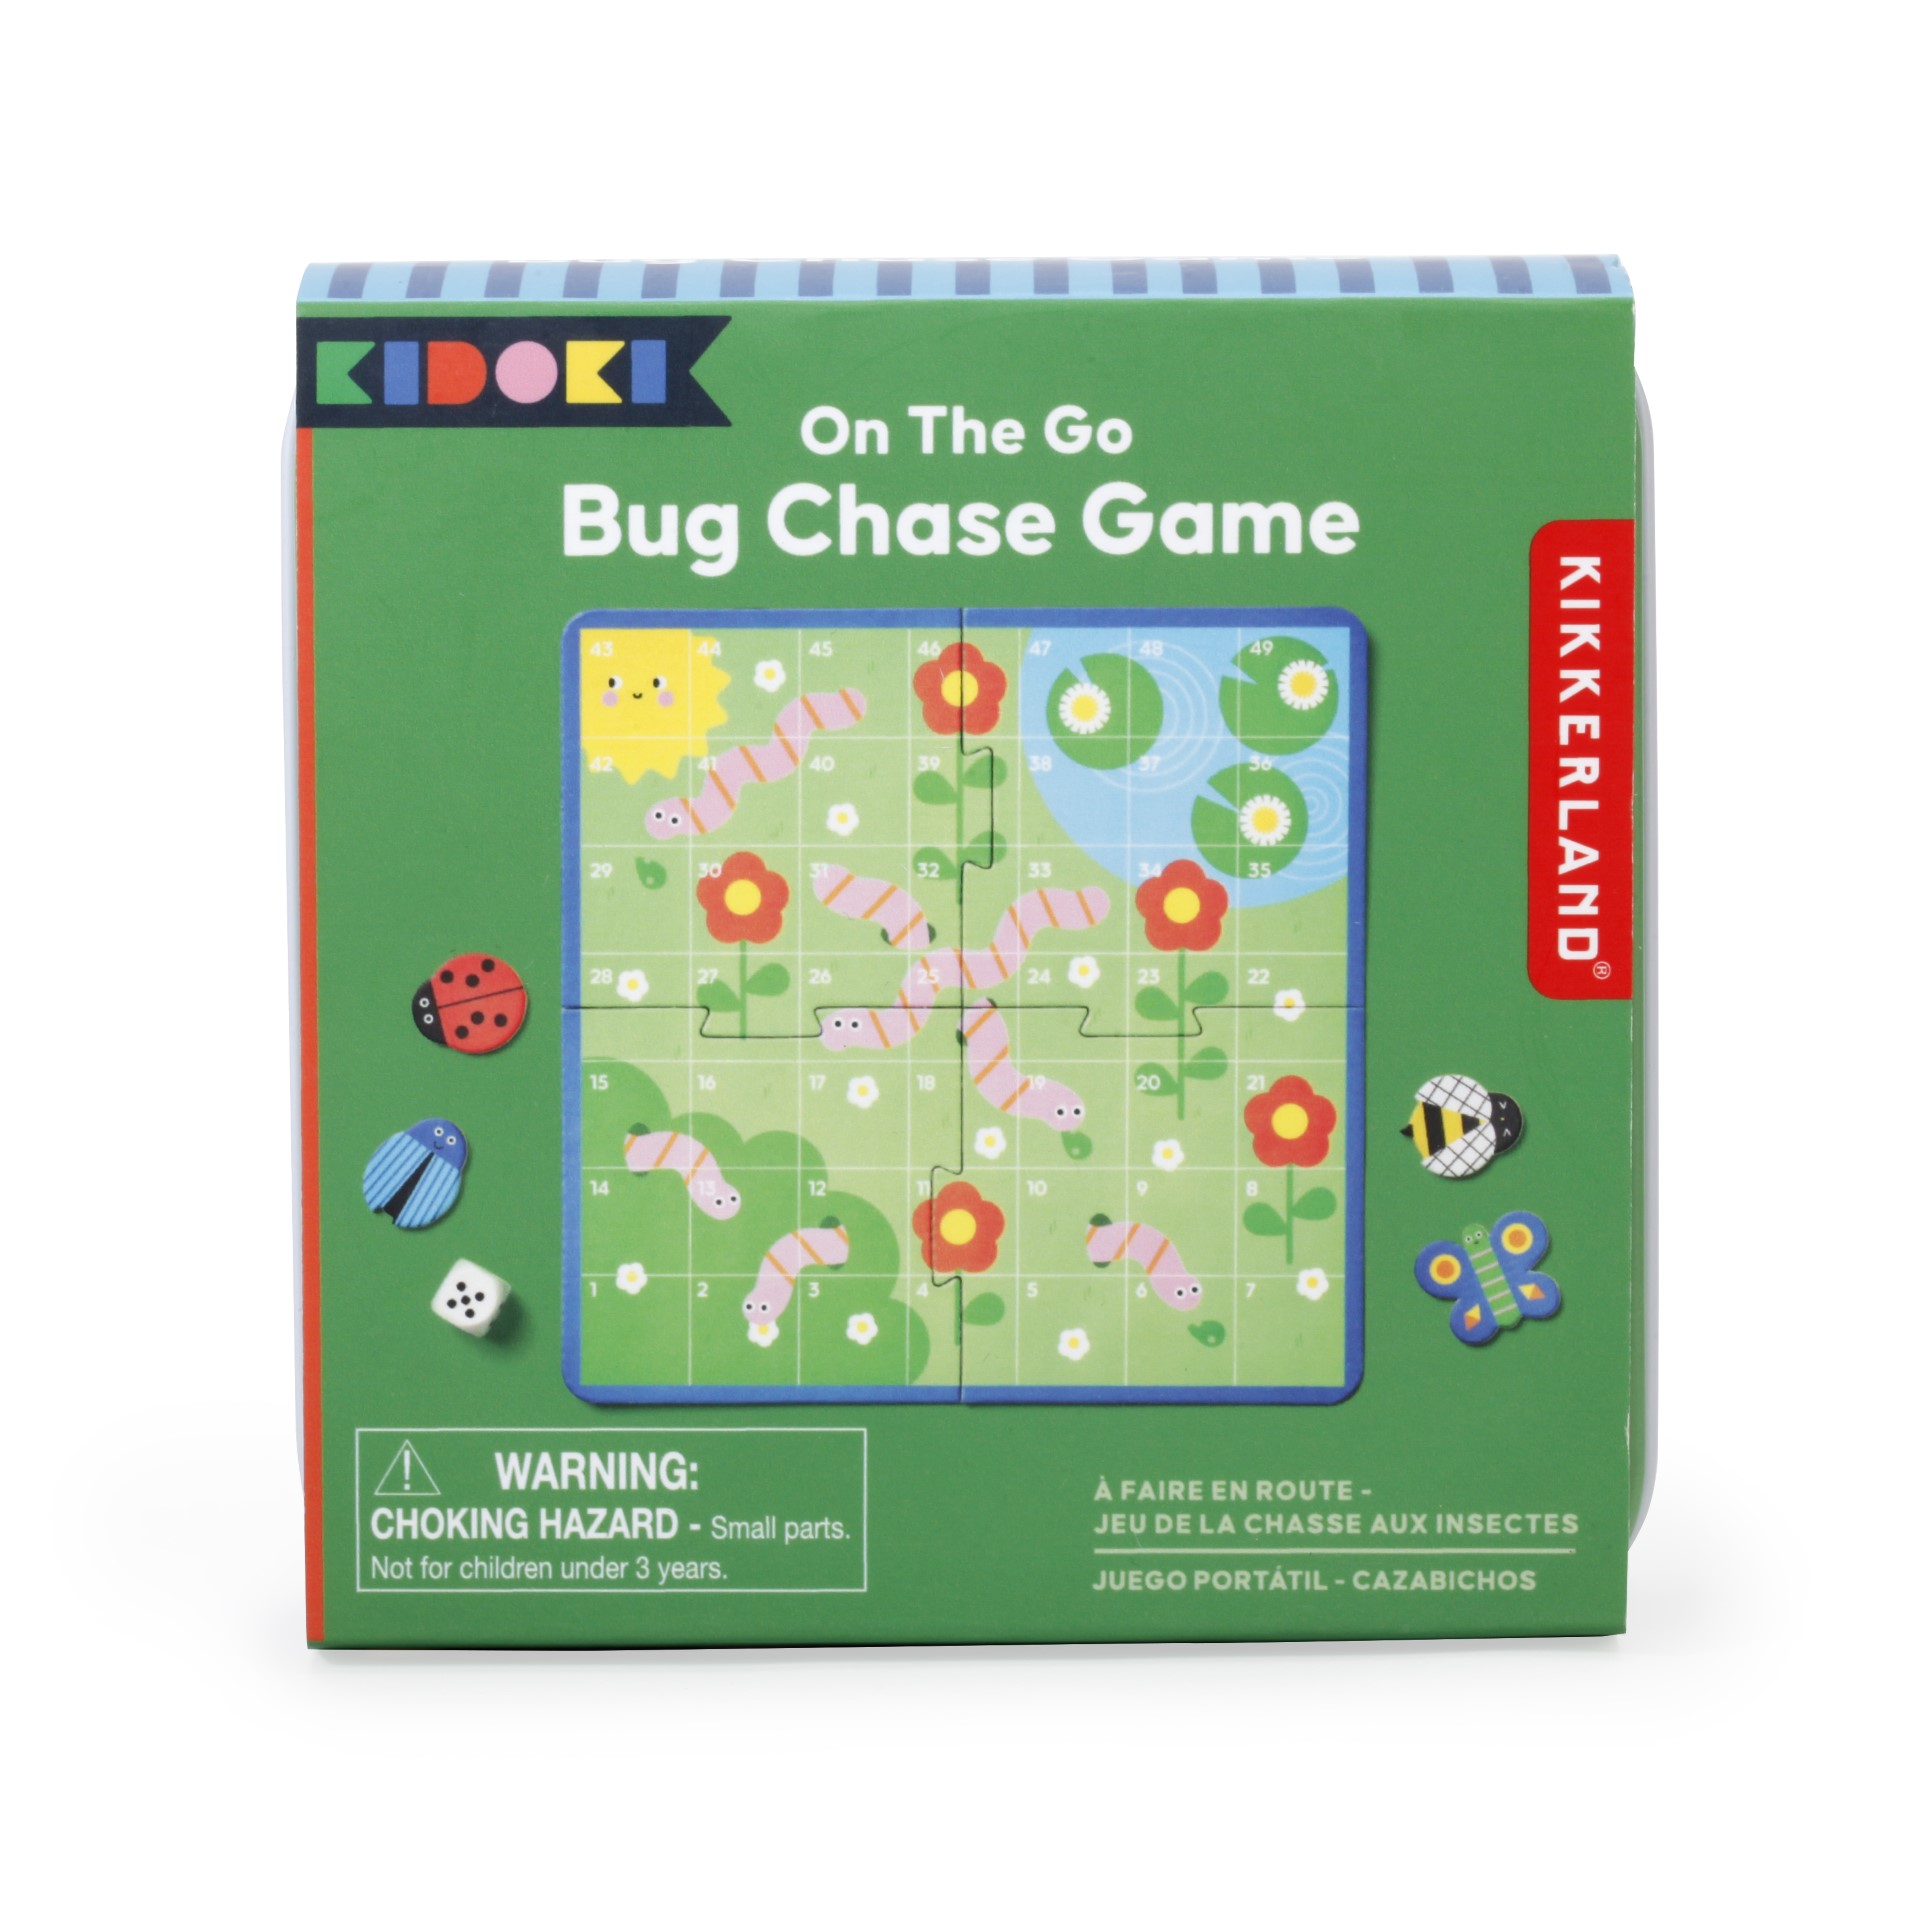 On the Go Bug Chase Game